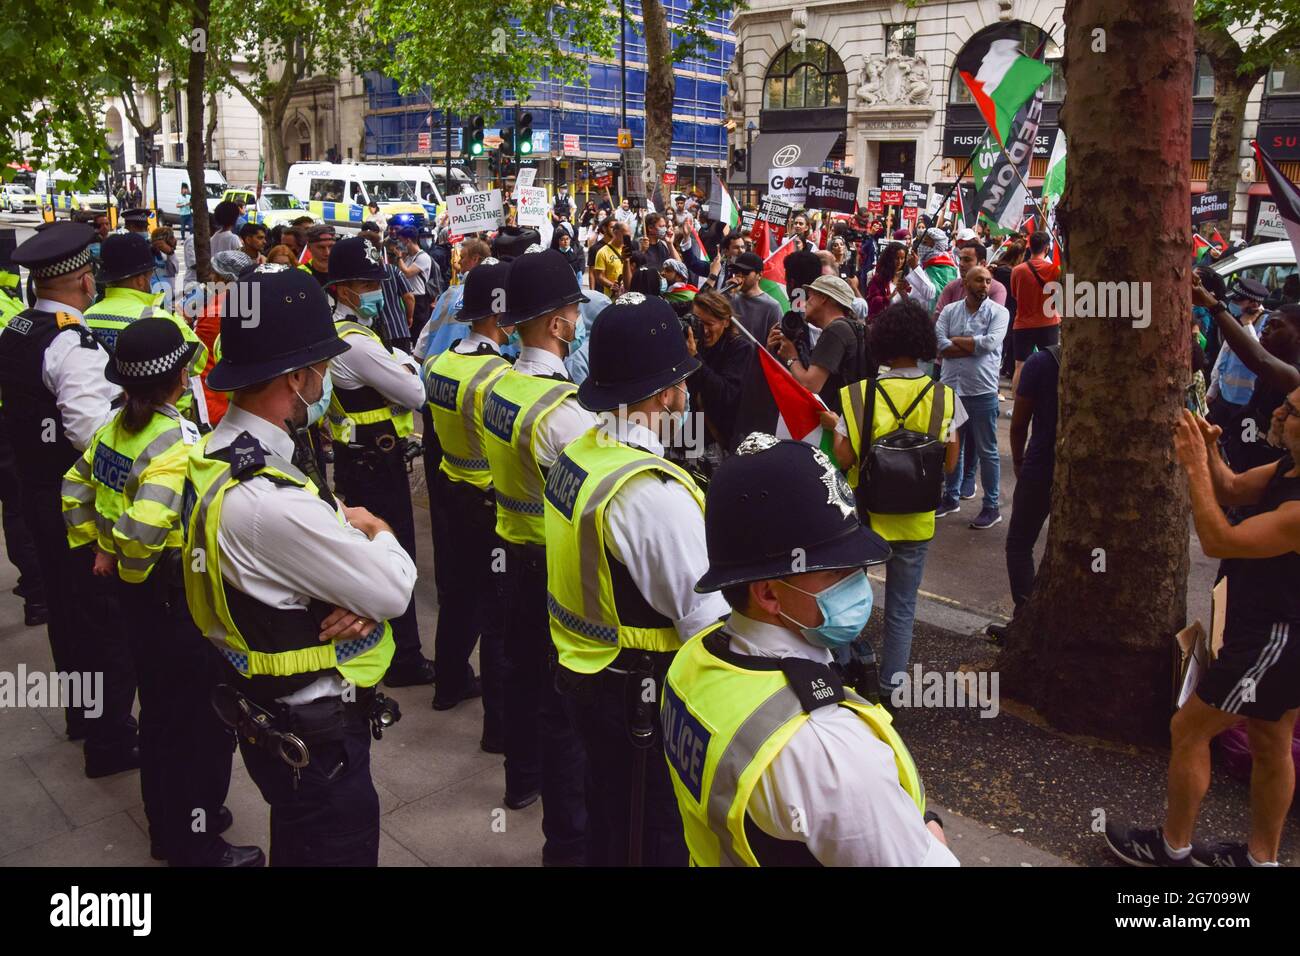 London, UK. 9th July 2021. Protesters and police gather outside the offices of Elbit Systems during the Student Protest For Palestine. Demonstrators marched to various universities in central London demanding they divest from "all companies complicit in Israeli violations of international law" and that they sever "all links with complicit Israeli institutions".  (Credit: Vuk Valcic / Alamy Live News) Stock Photo